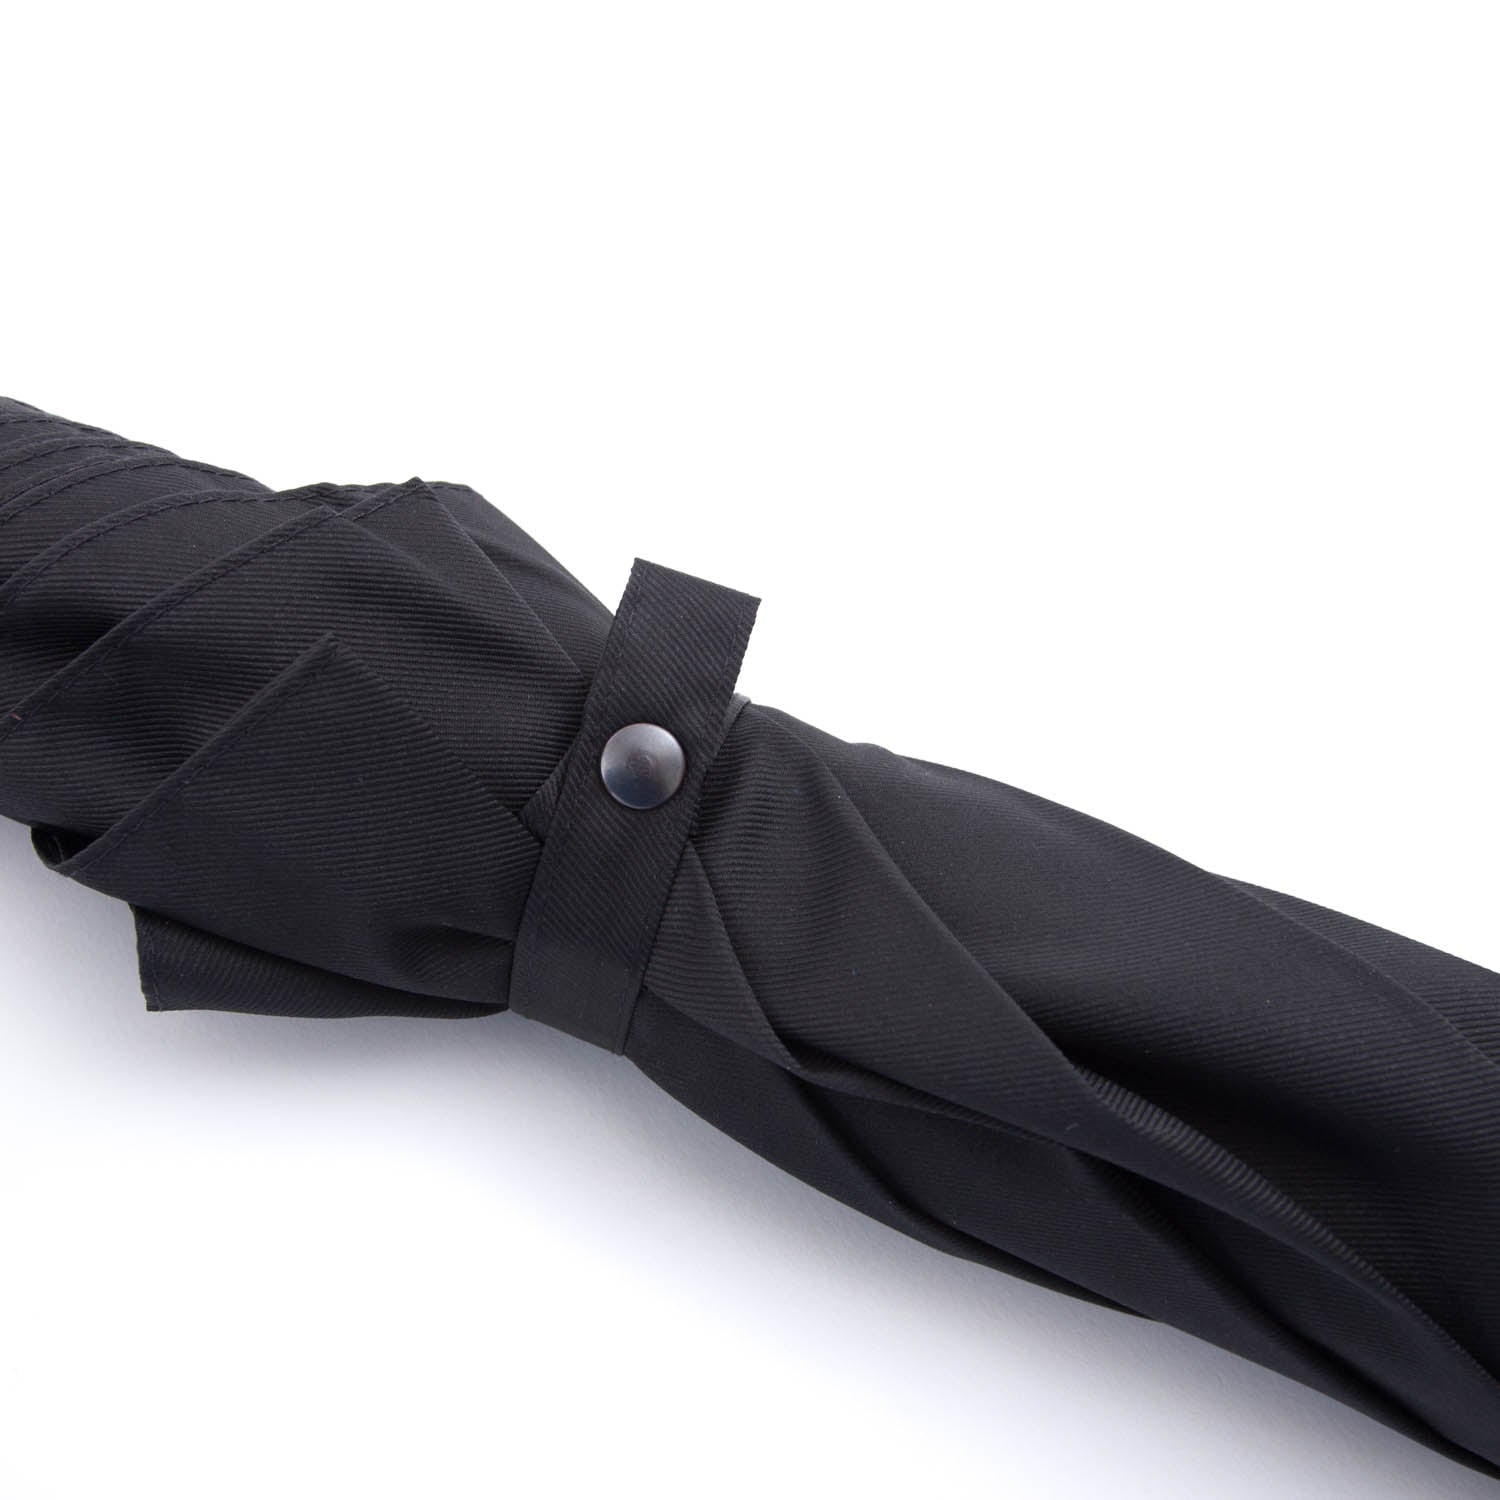 A Black Doorman Umbrella with Chestnut Handle from KirbyAllison.com provides rain protection on a white background.